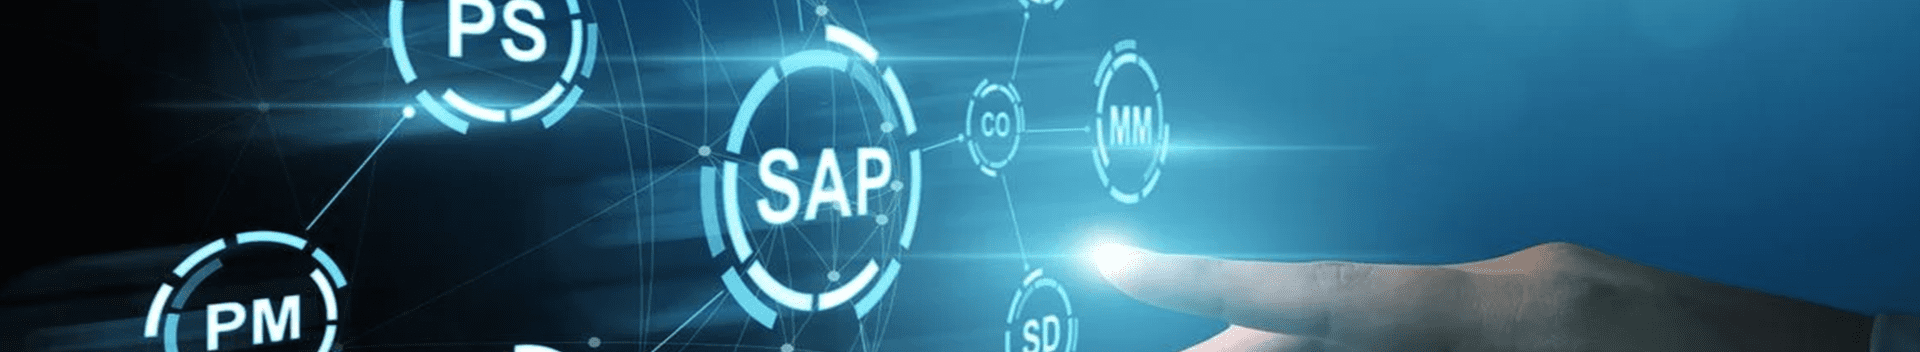 SAP Business Technology Platform – highlights from SAP discovery day - - Avega Group AB